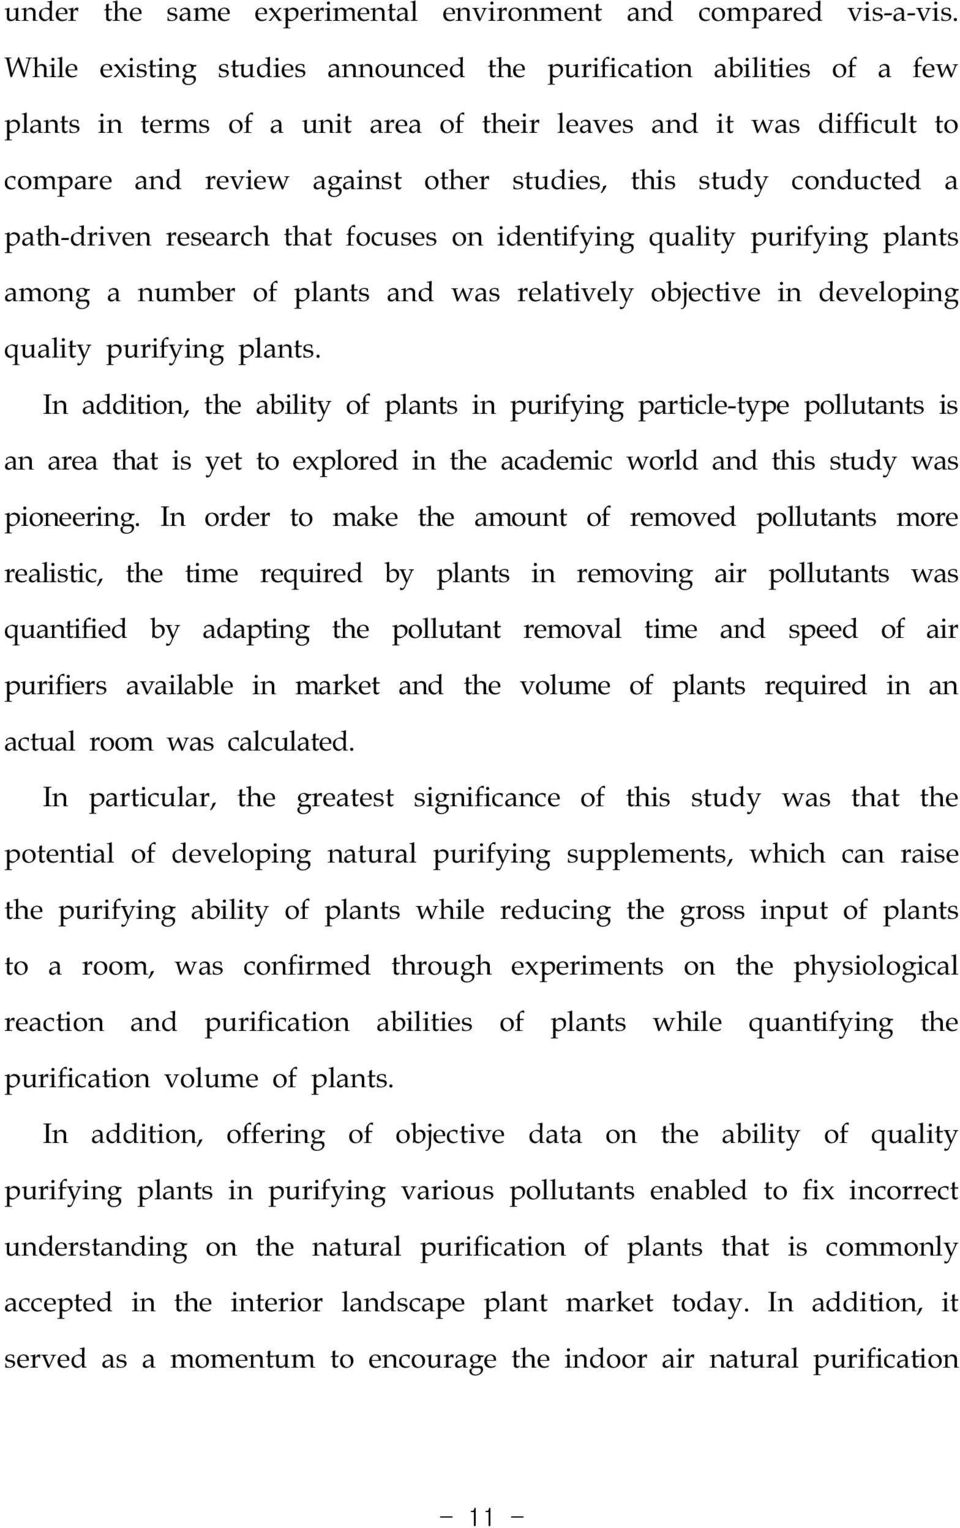 conducted a path-driven research that focuses on identifying quality purifying plants among a number of plants and was relatively objective in developing quality purifying plants.